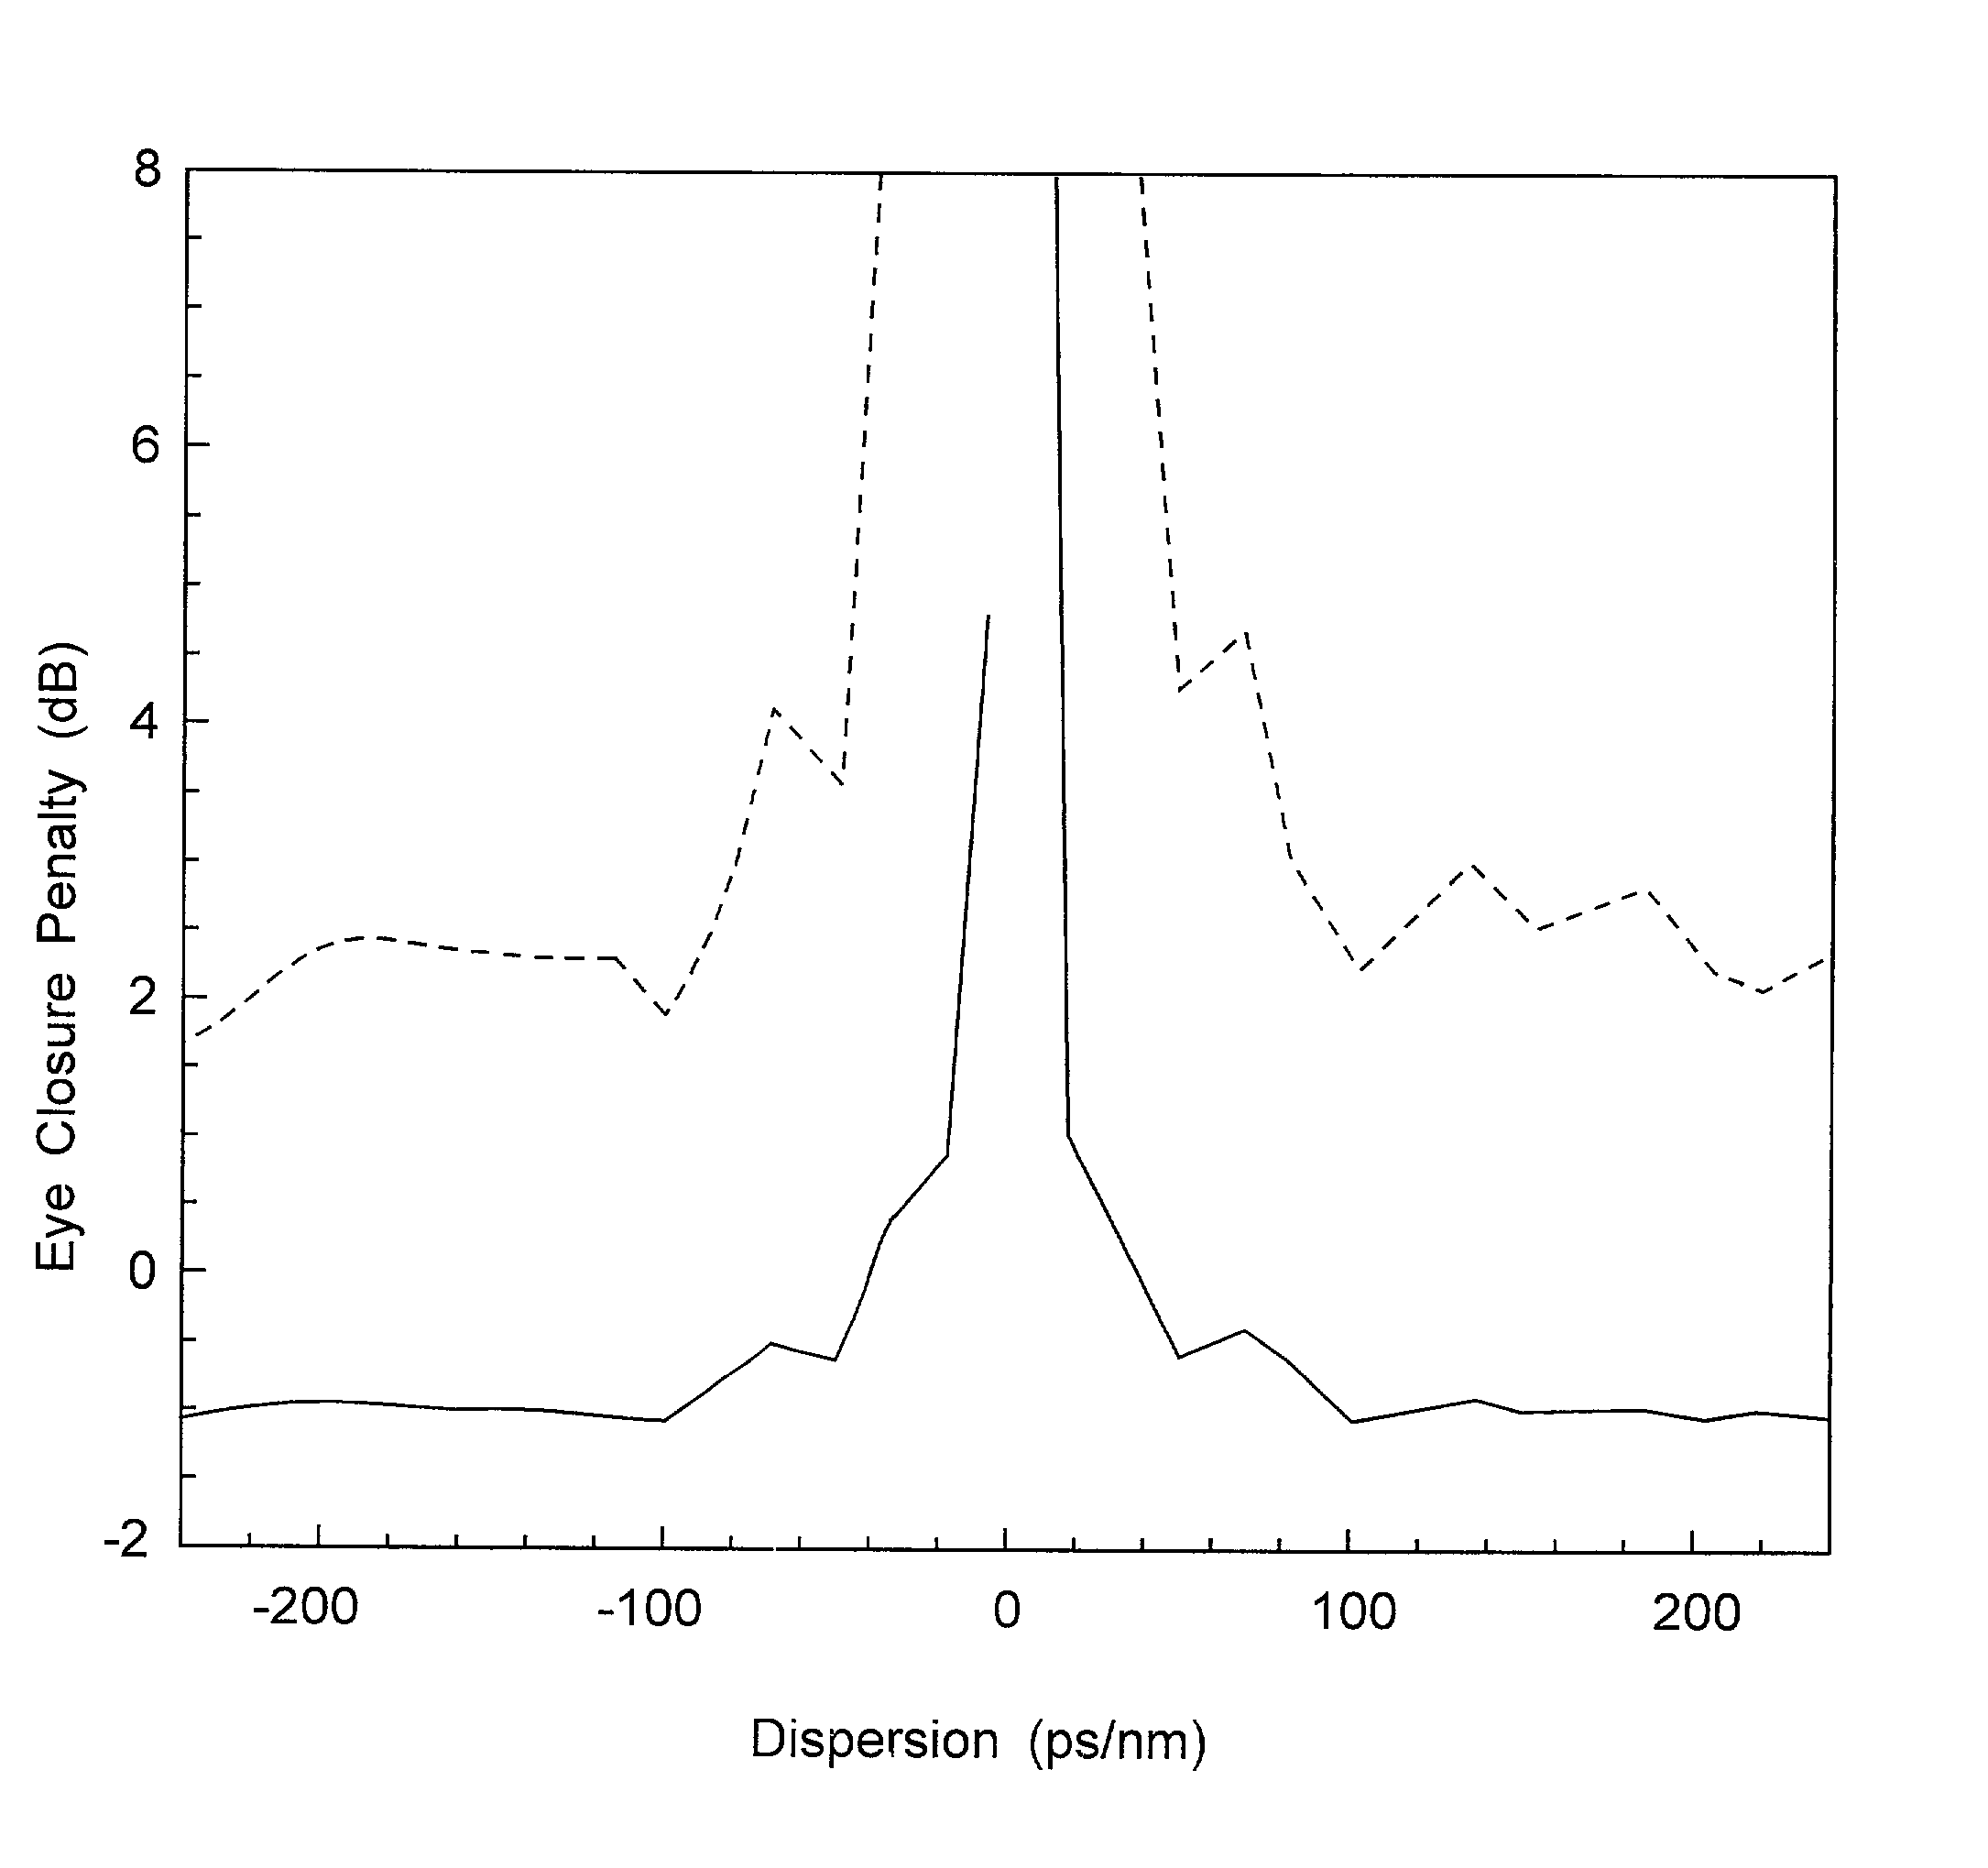 High-dispersion fibers for high-speed transmission